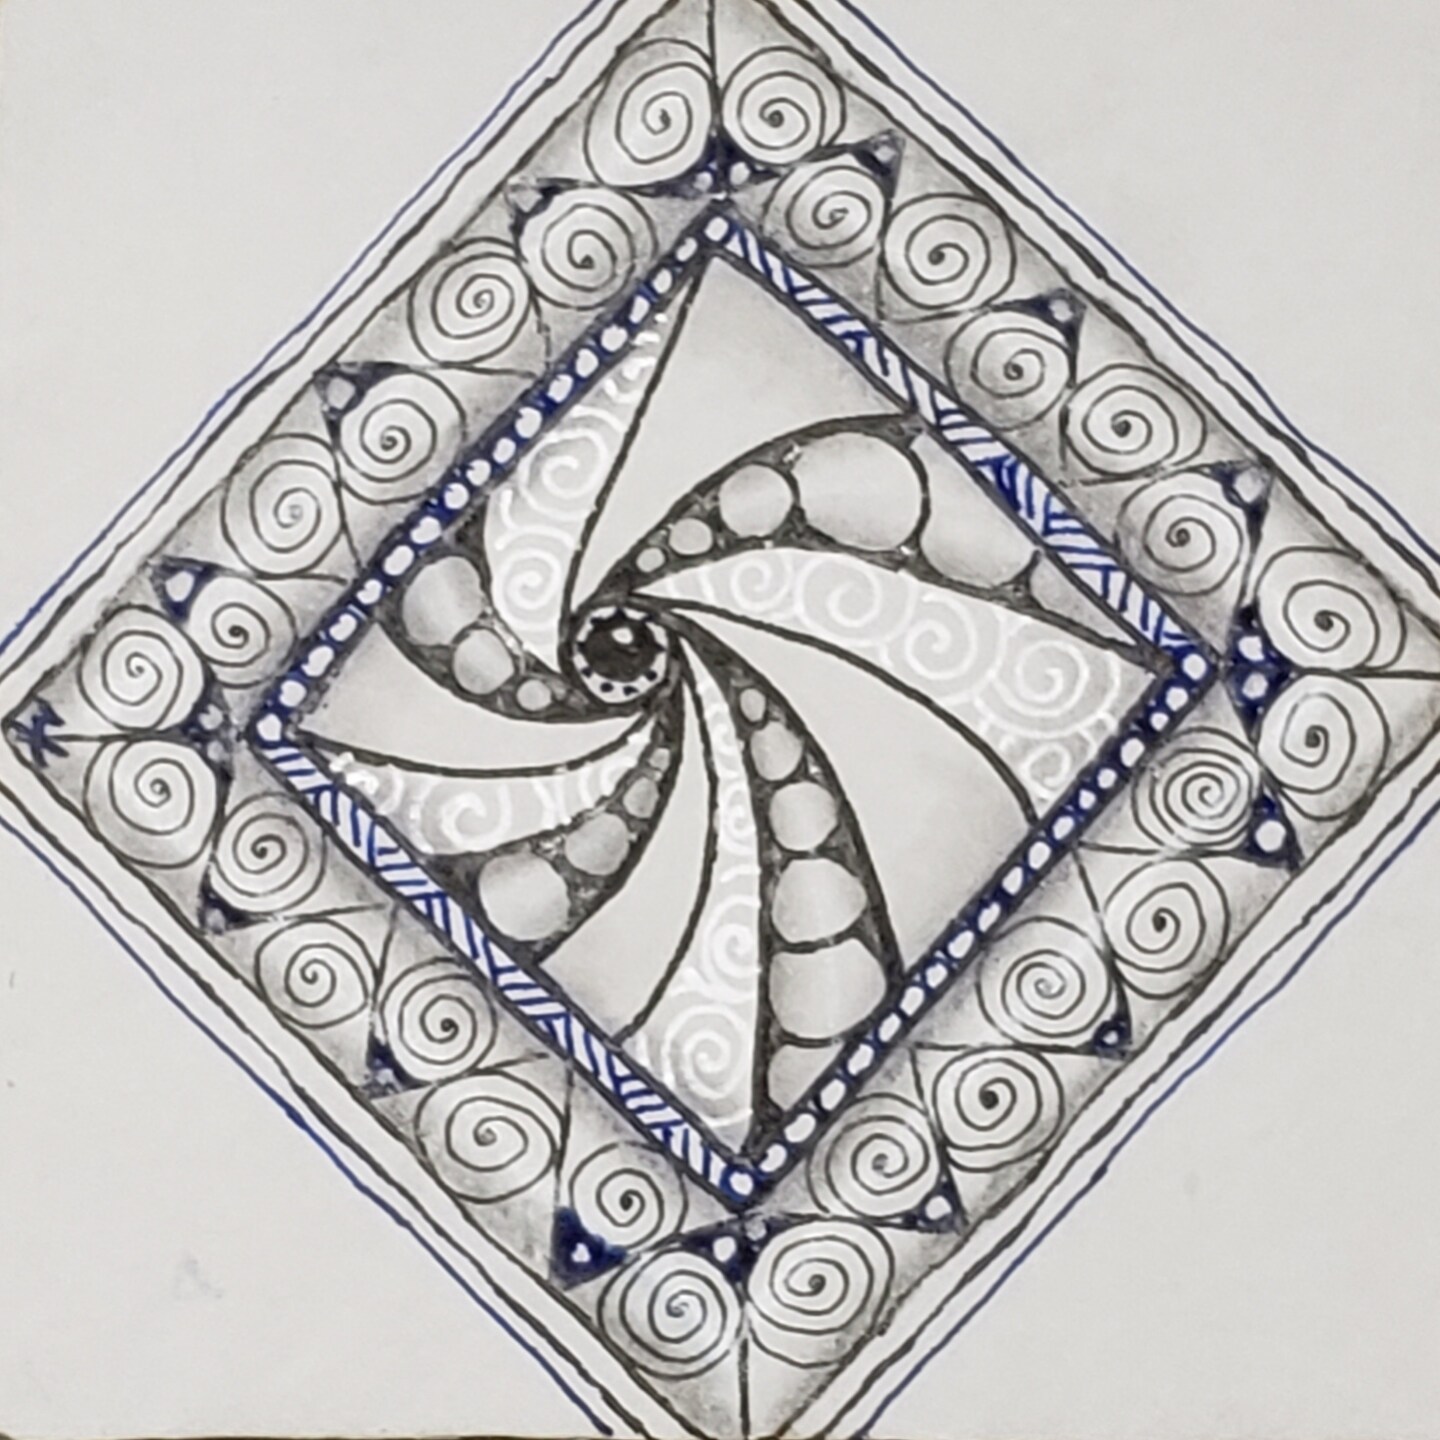 Introduction to the Zentangle method of drawing